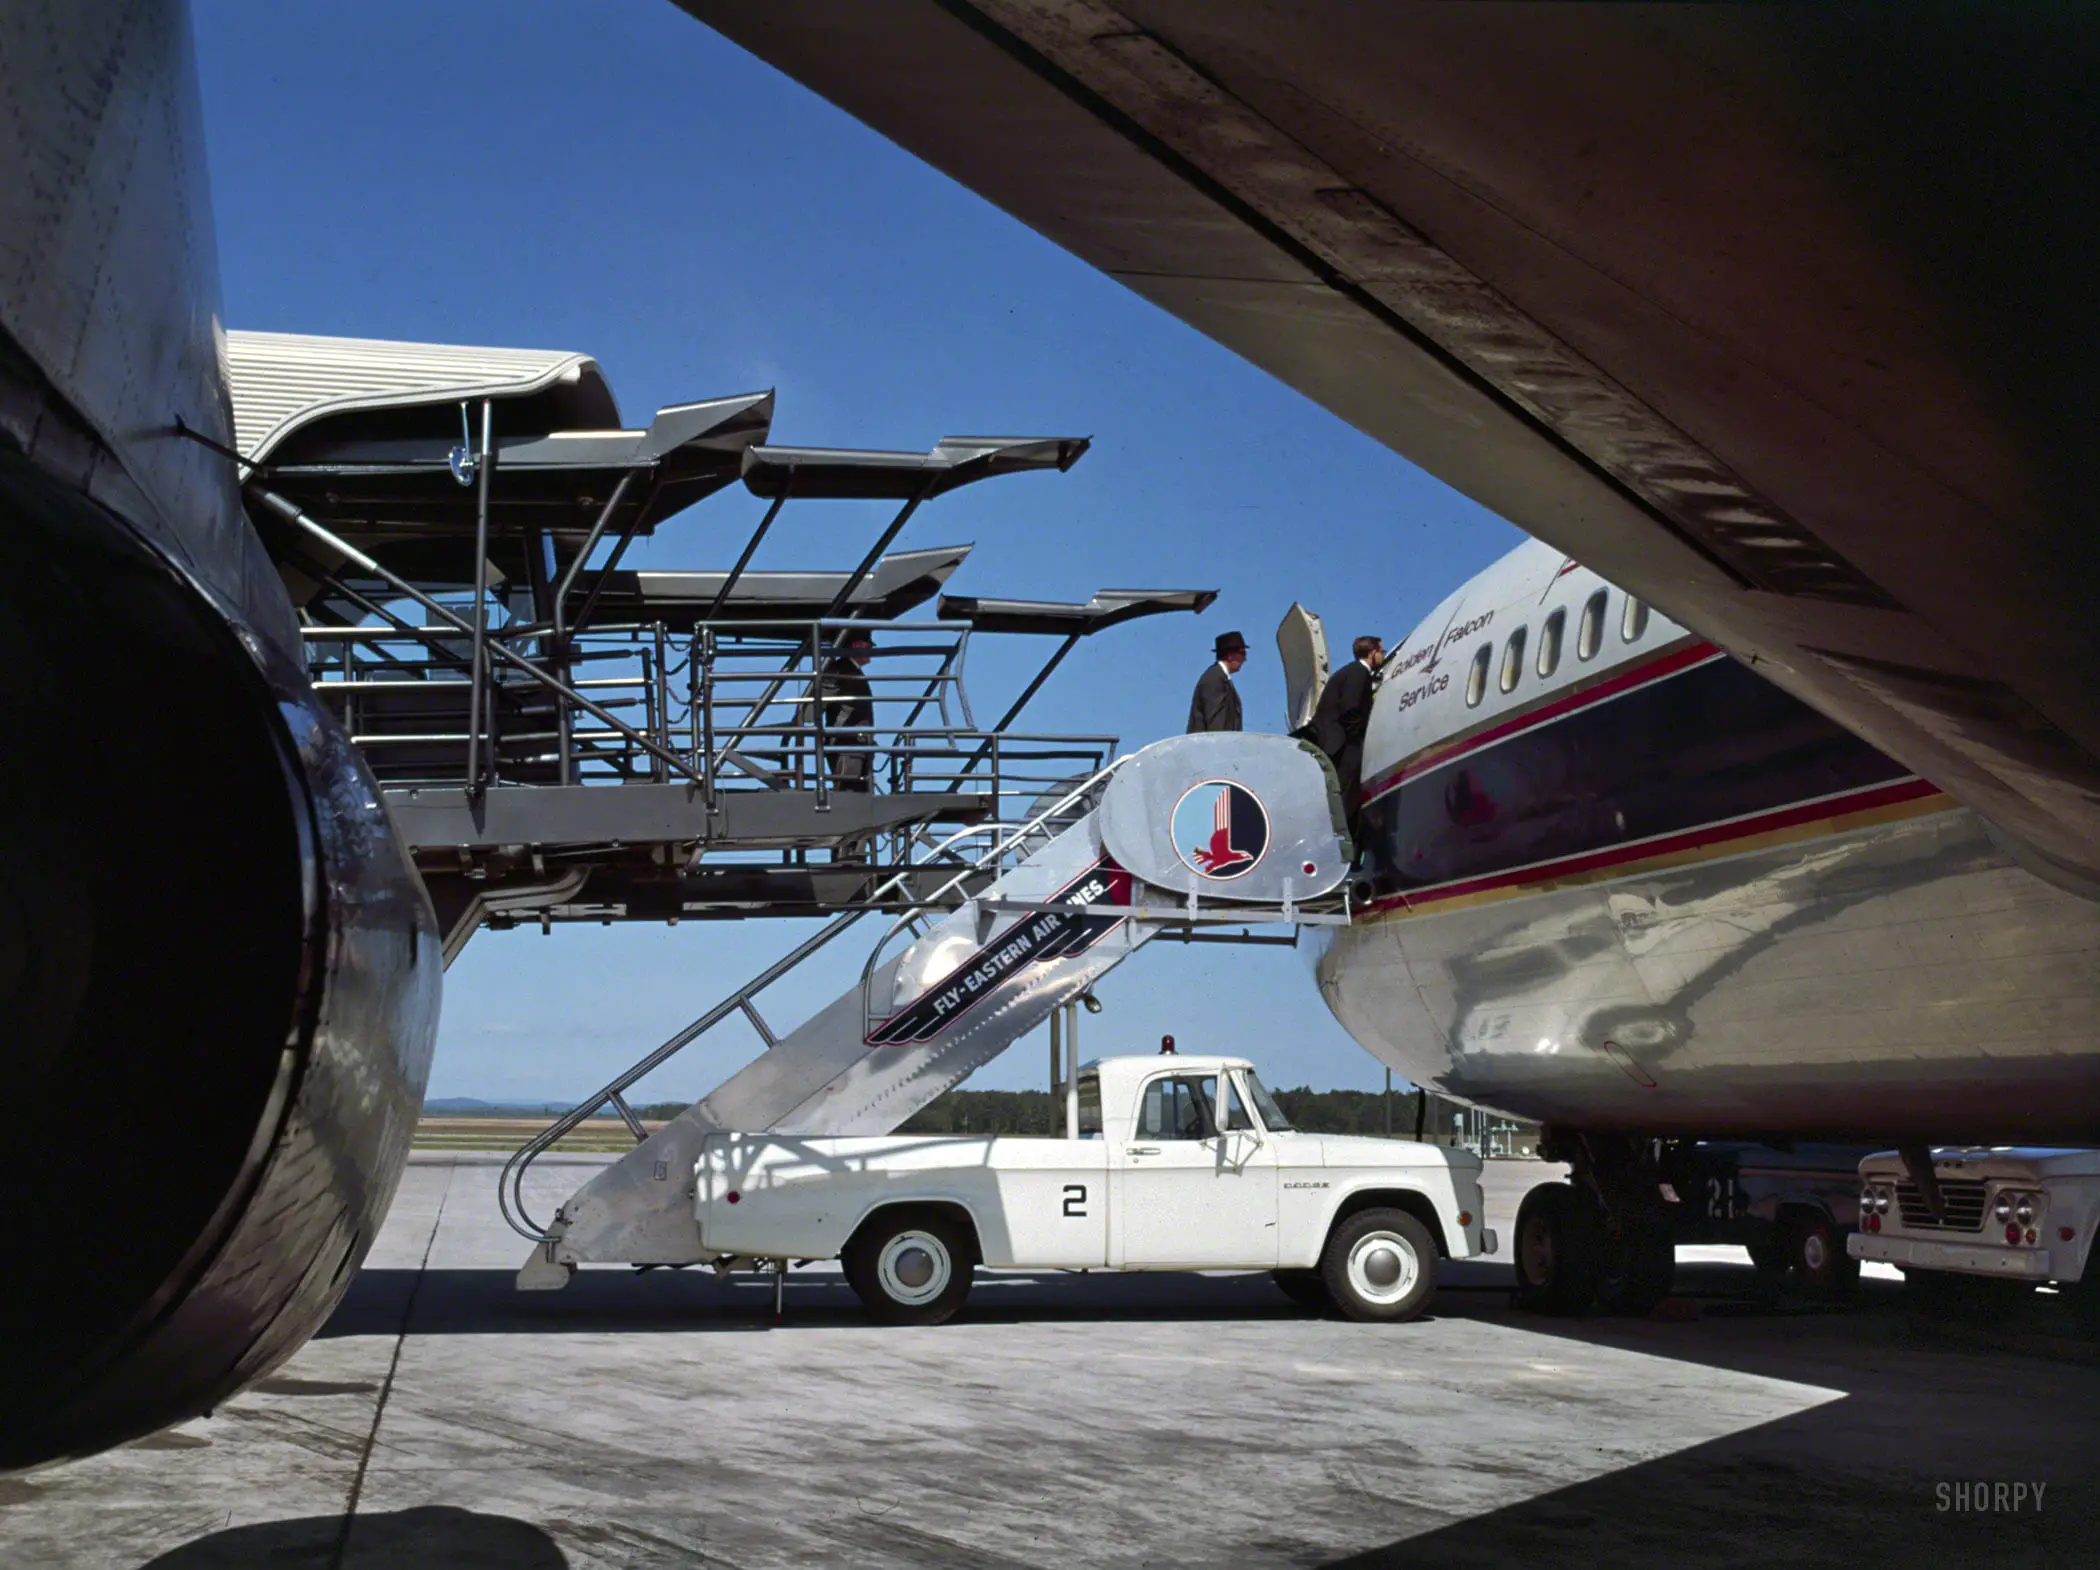 "Dulles International Airport, Chantilly, Va., 1958-63. Eero Saarinen, architect. Mobile lounges." A sort of giant rolling jetway (mostly out of frame at left) that carried passengers at Dulles from terminal to plane. The stair truck supported the gangway. 120mm color transparency by Balthazar Korab.